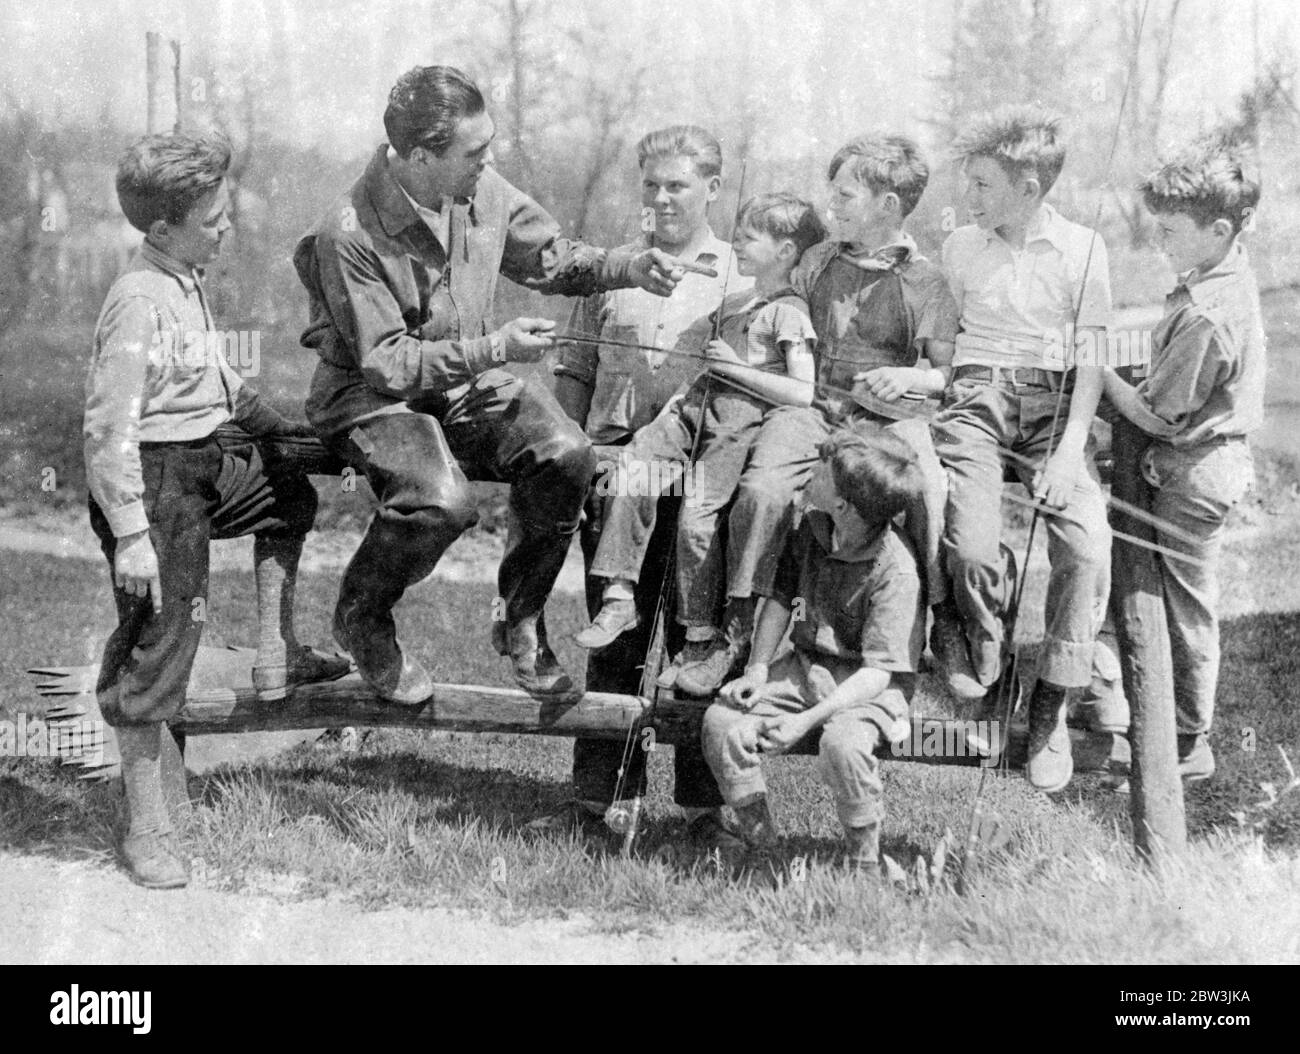 That One Was a Knock - out , Says Schmeling ! Fishing is part of Max Schmeling ' s training at Napanochi , New York State , for the German heavyweight ' s forthcoming bout with Joe Louis , America ' s coloured terror. Photo shows : Schmeling telling a fishing story to a group of young admirers at his Napanochi training camp . 9 May 1936 Stock Photo